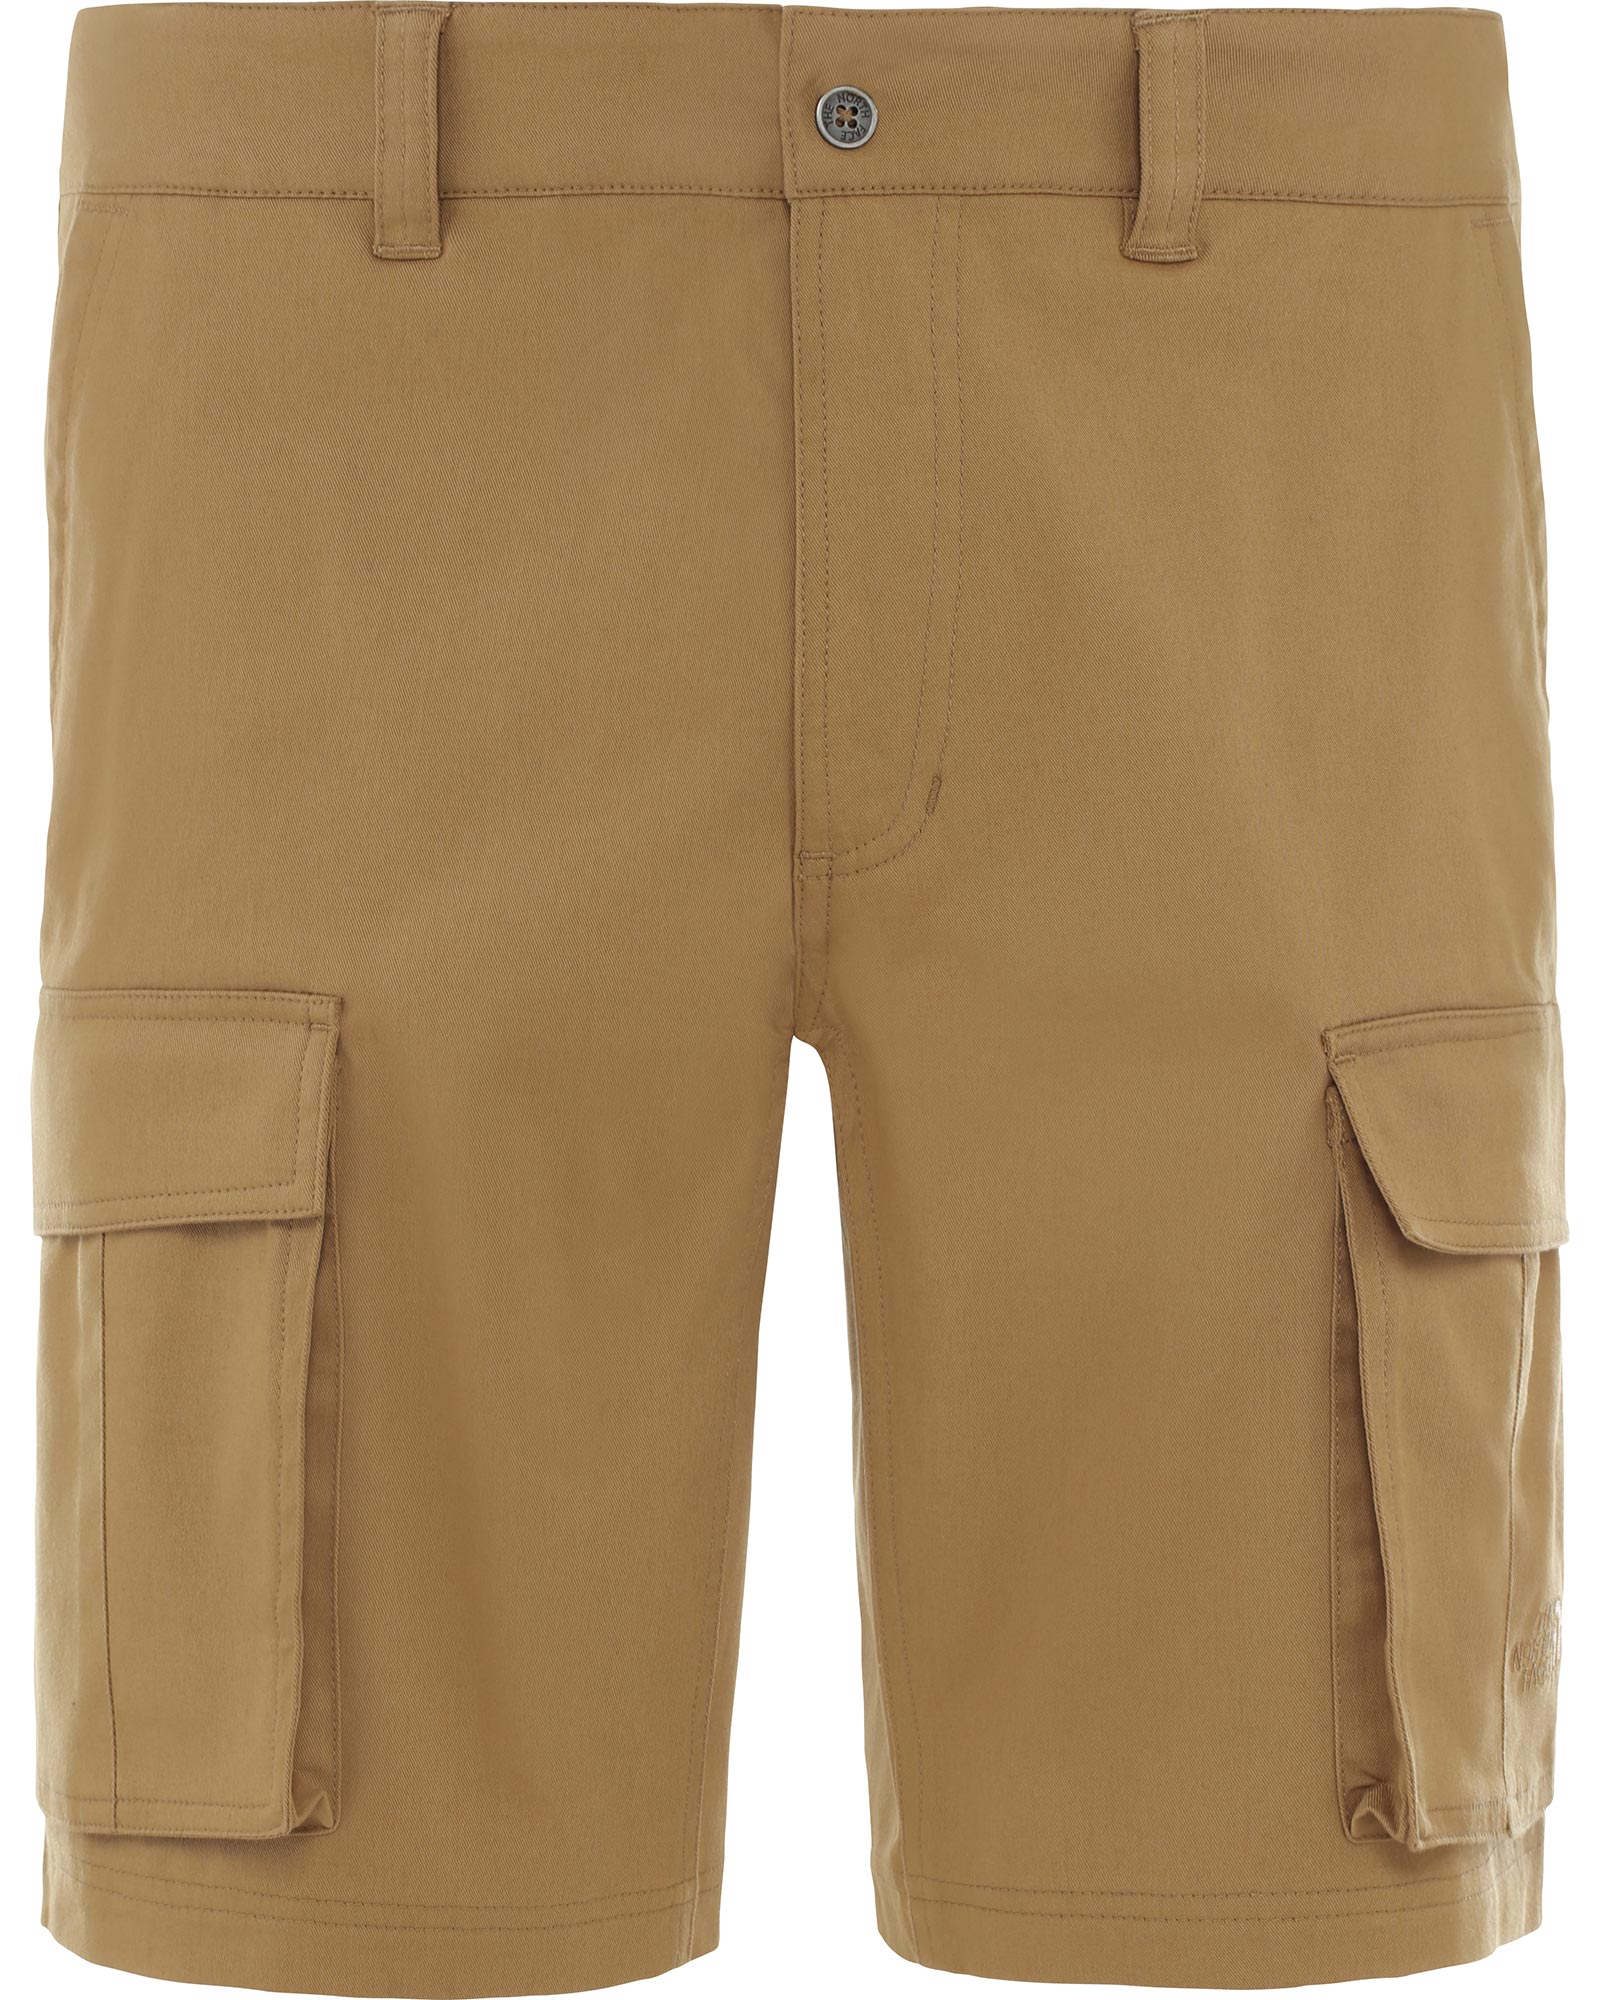 Product image of The North Face Anticline Men's Cargo Shorts